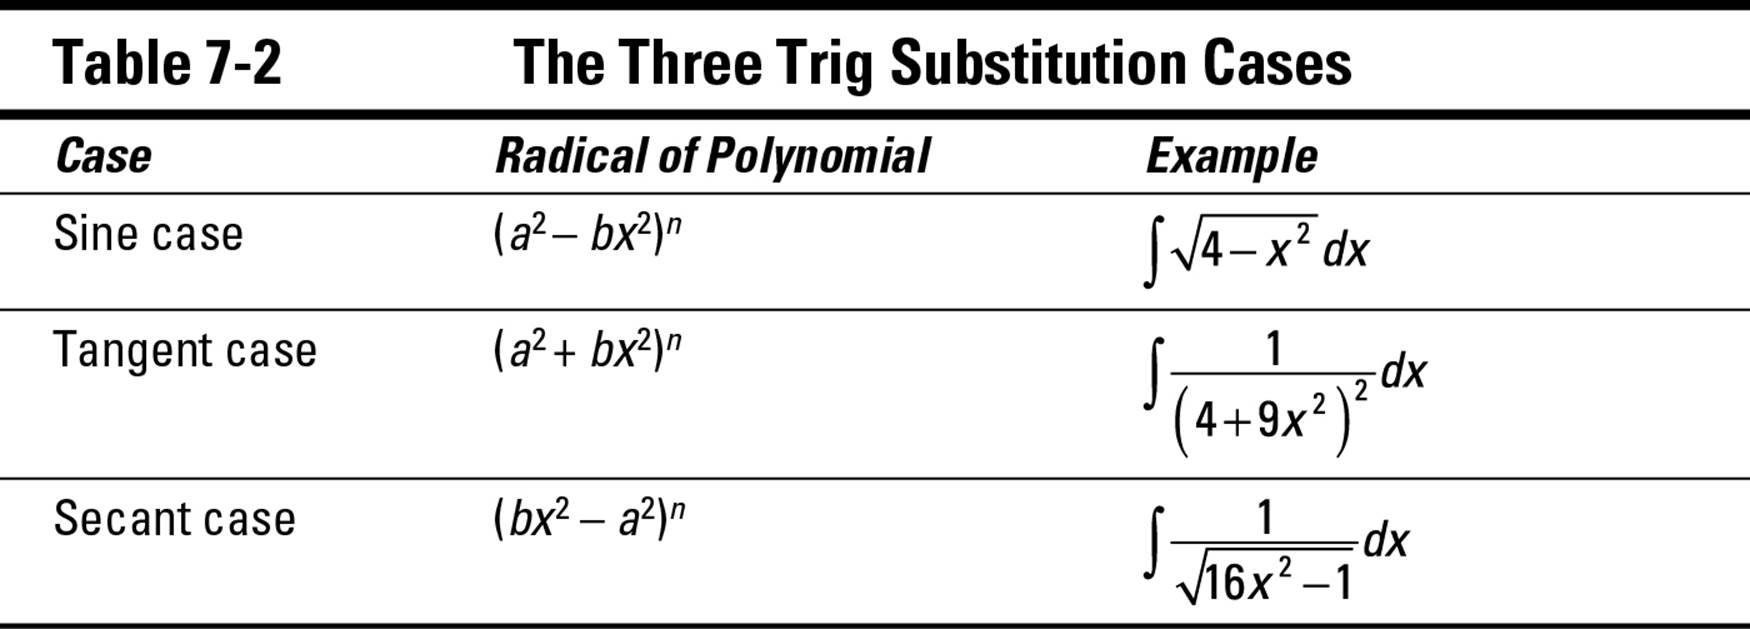 trig-substitution-knowing-all-the-tri-angles-indefinite-integrals